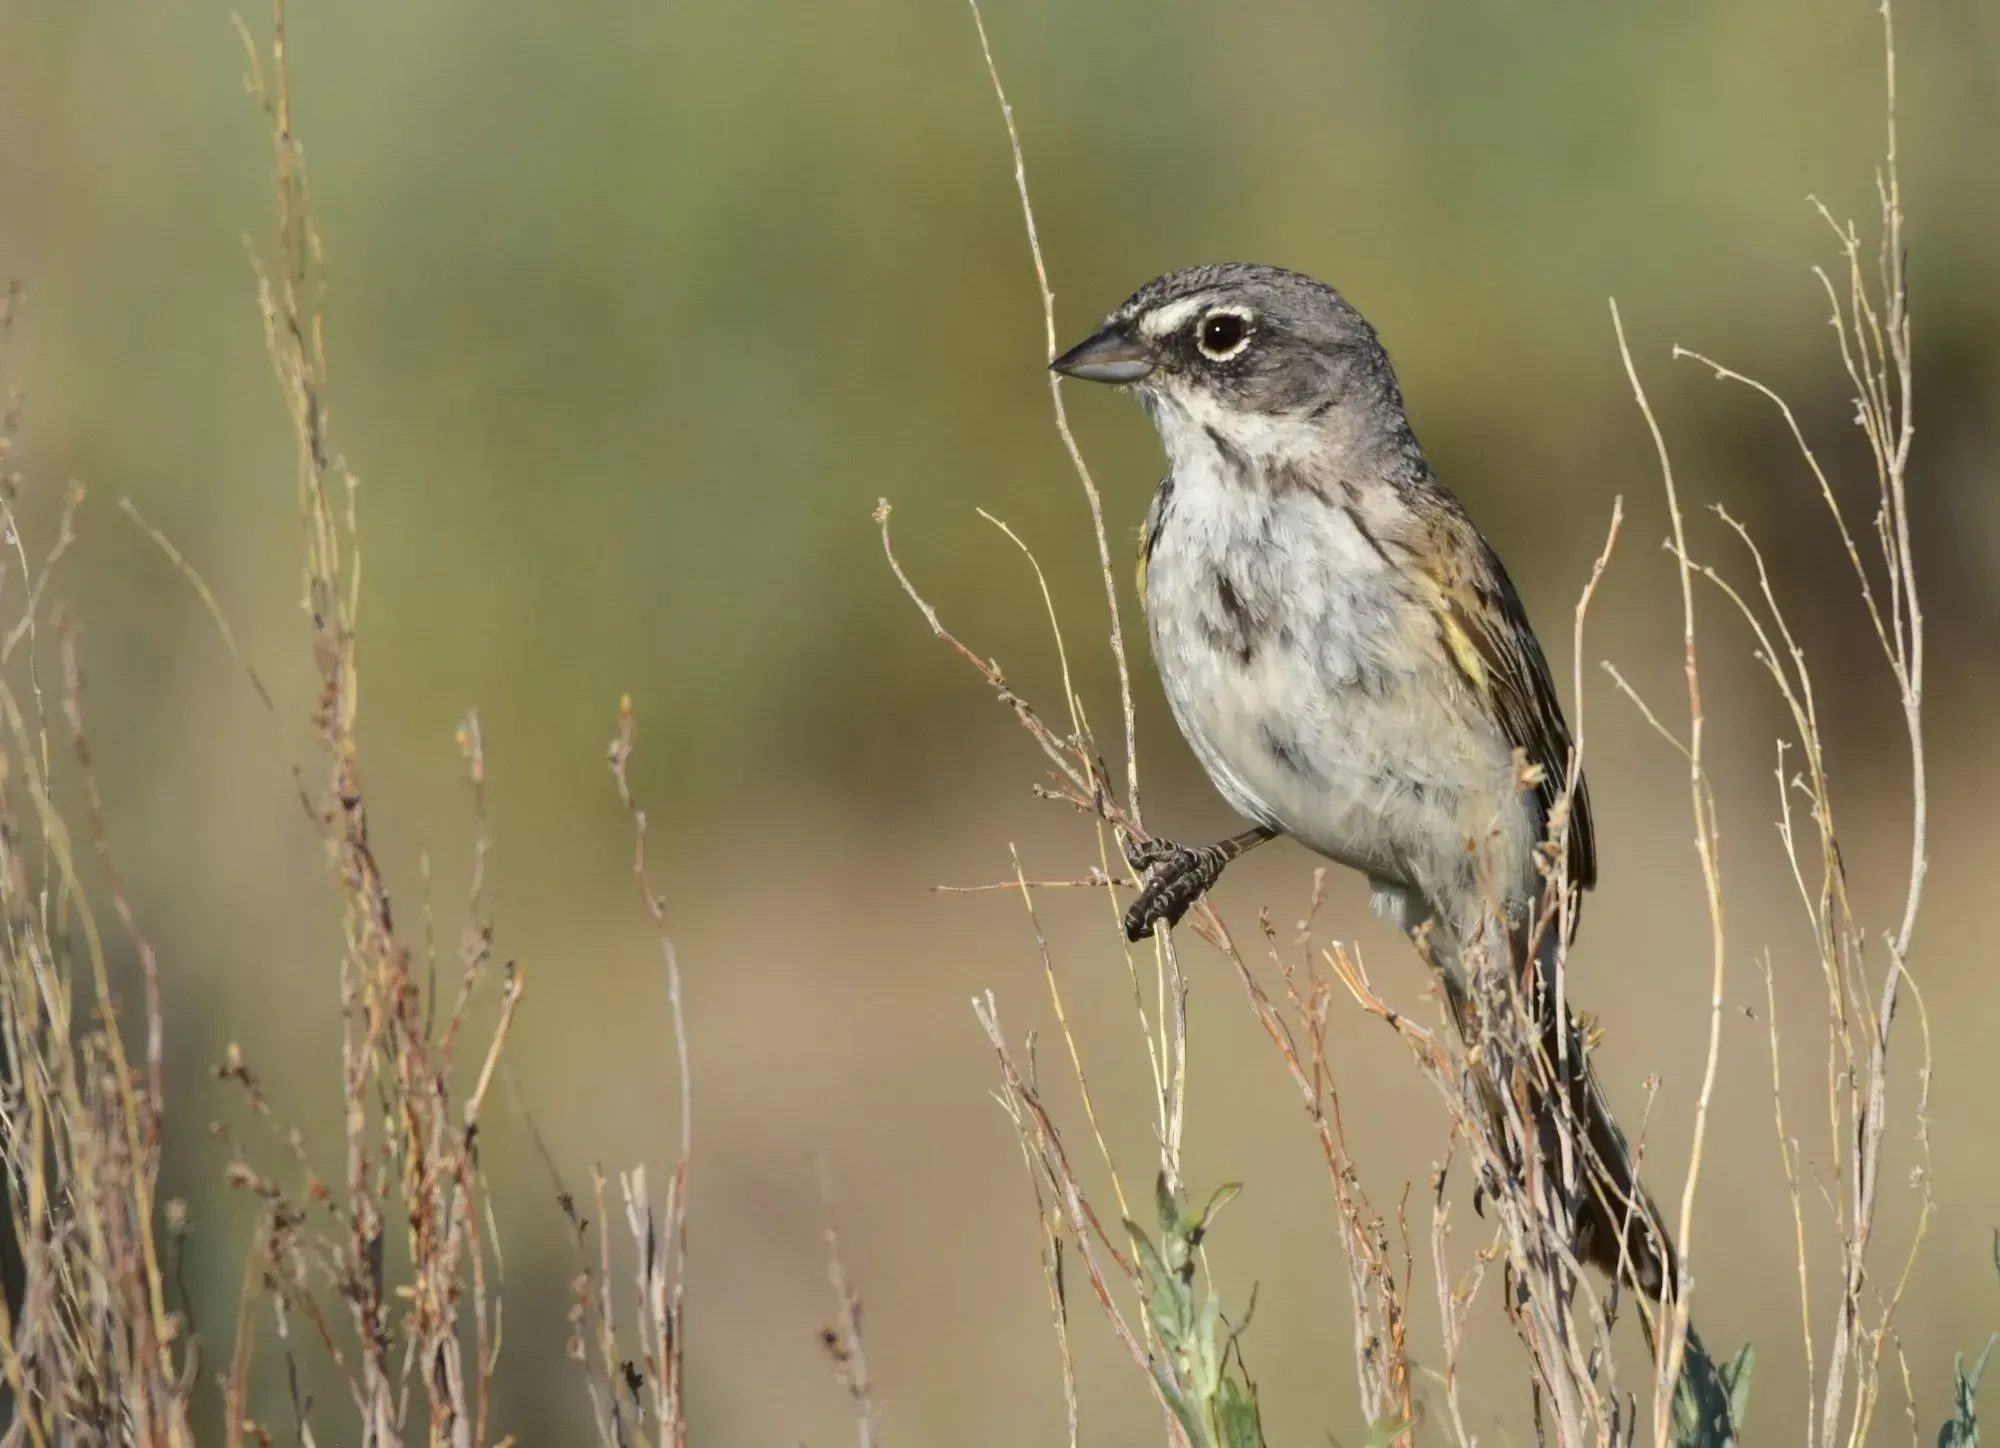 The sagebrush sparrow range map is around western United States, Mexico and parts of California.